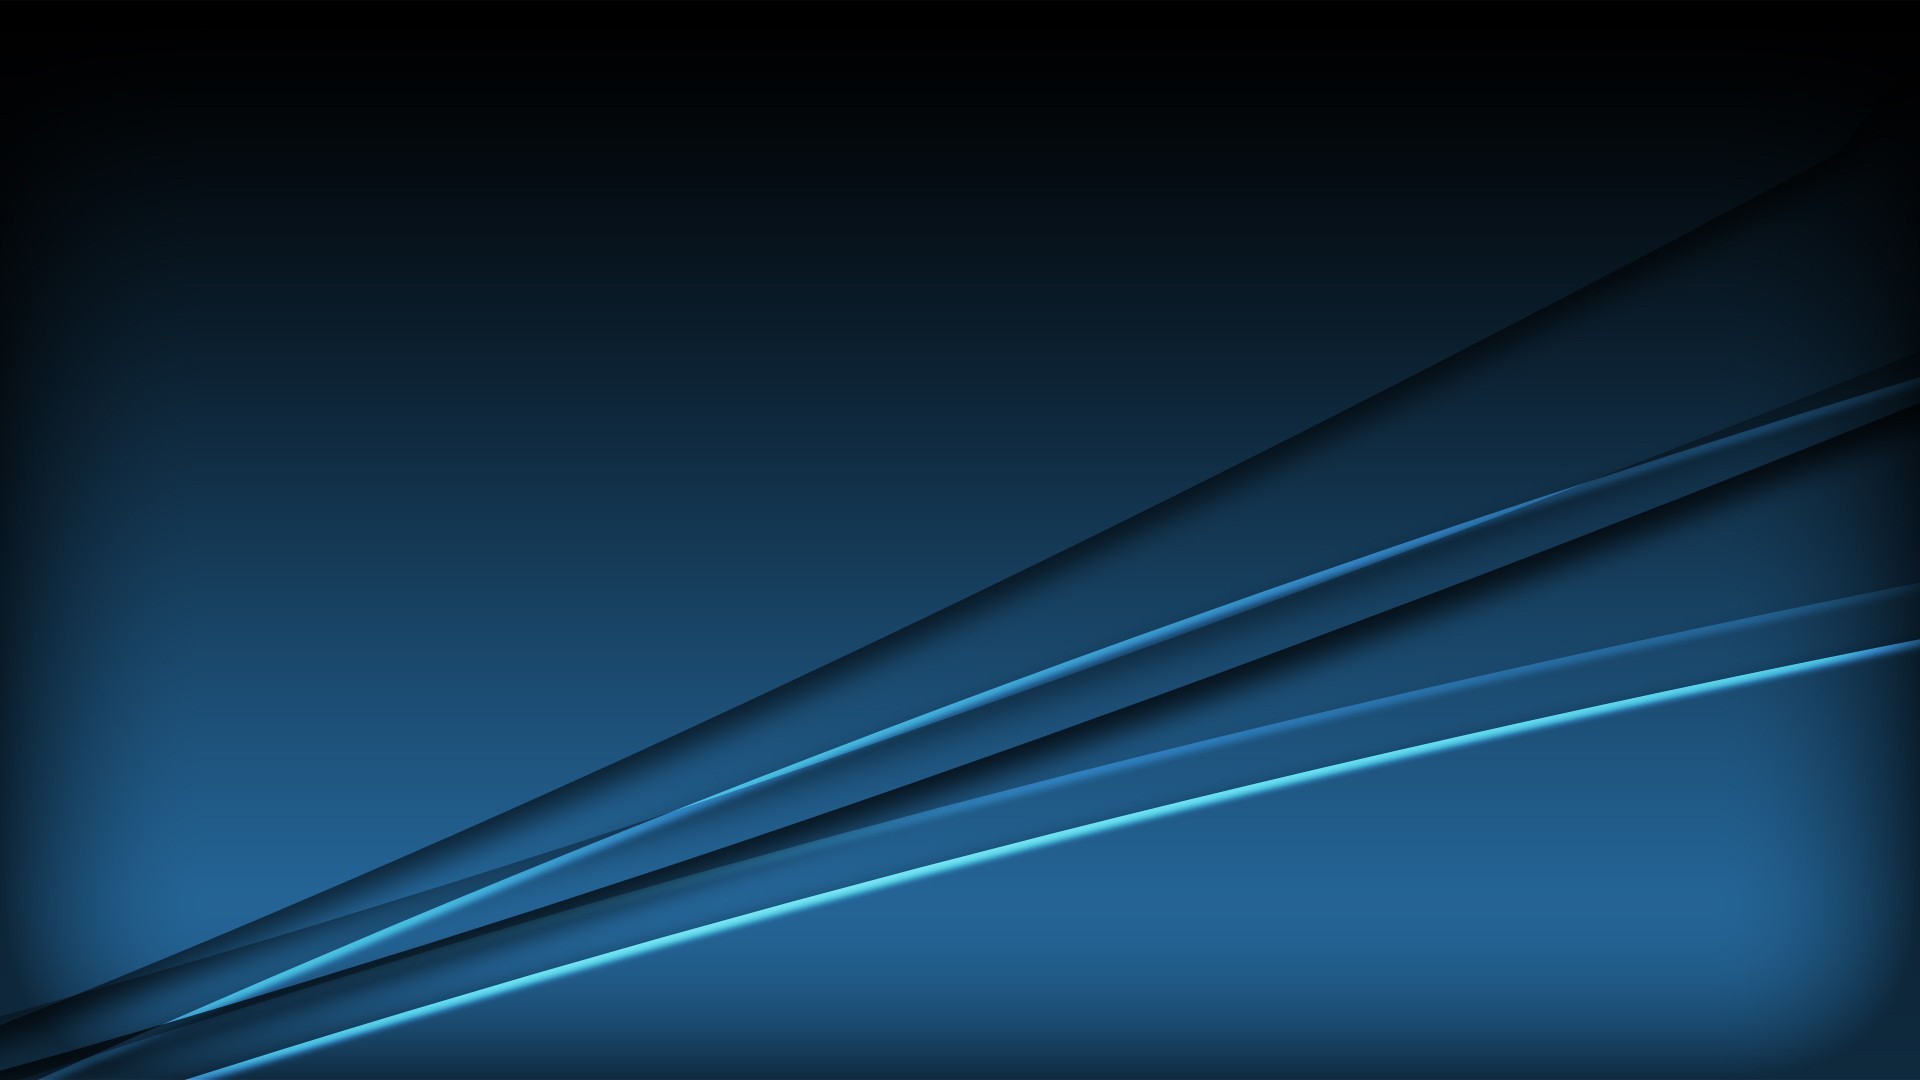 Abstract Blue Minimalistic Puter Graphics Wallpaper